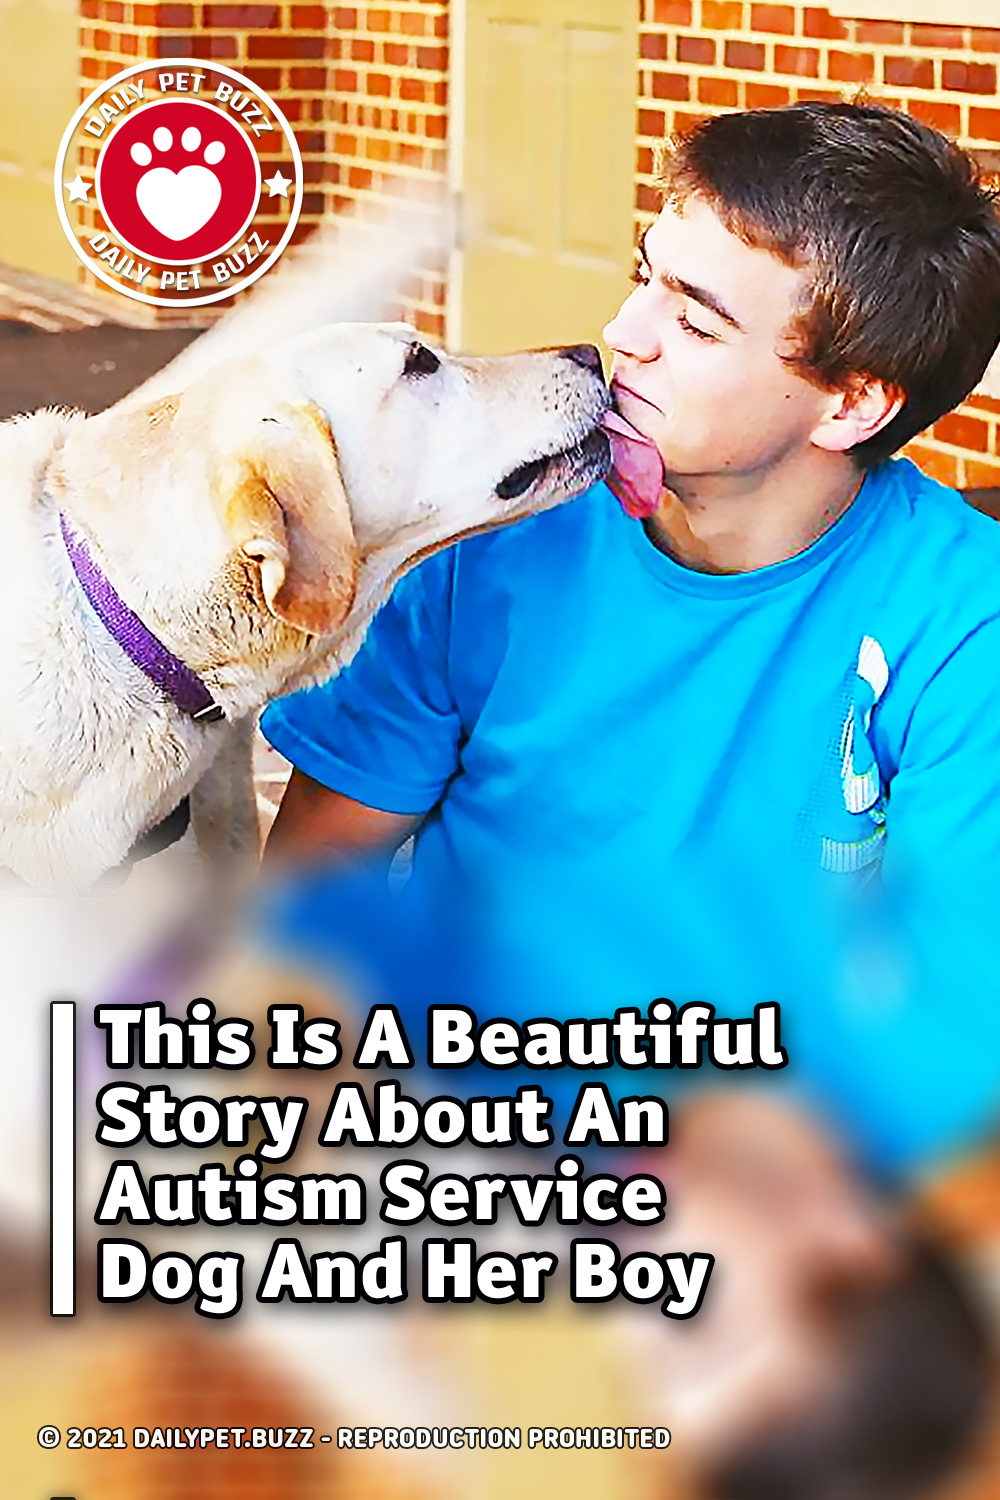 This Is A Beautiful Story About An Autism Service Dog And Her Boy